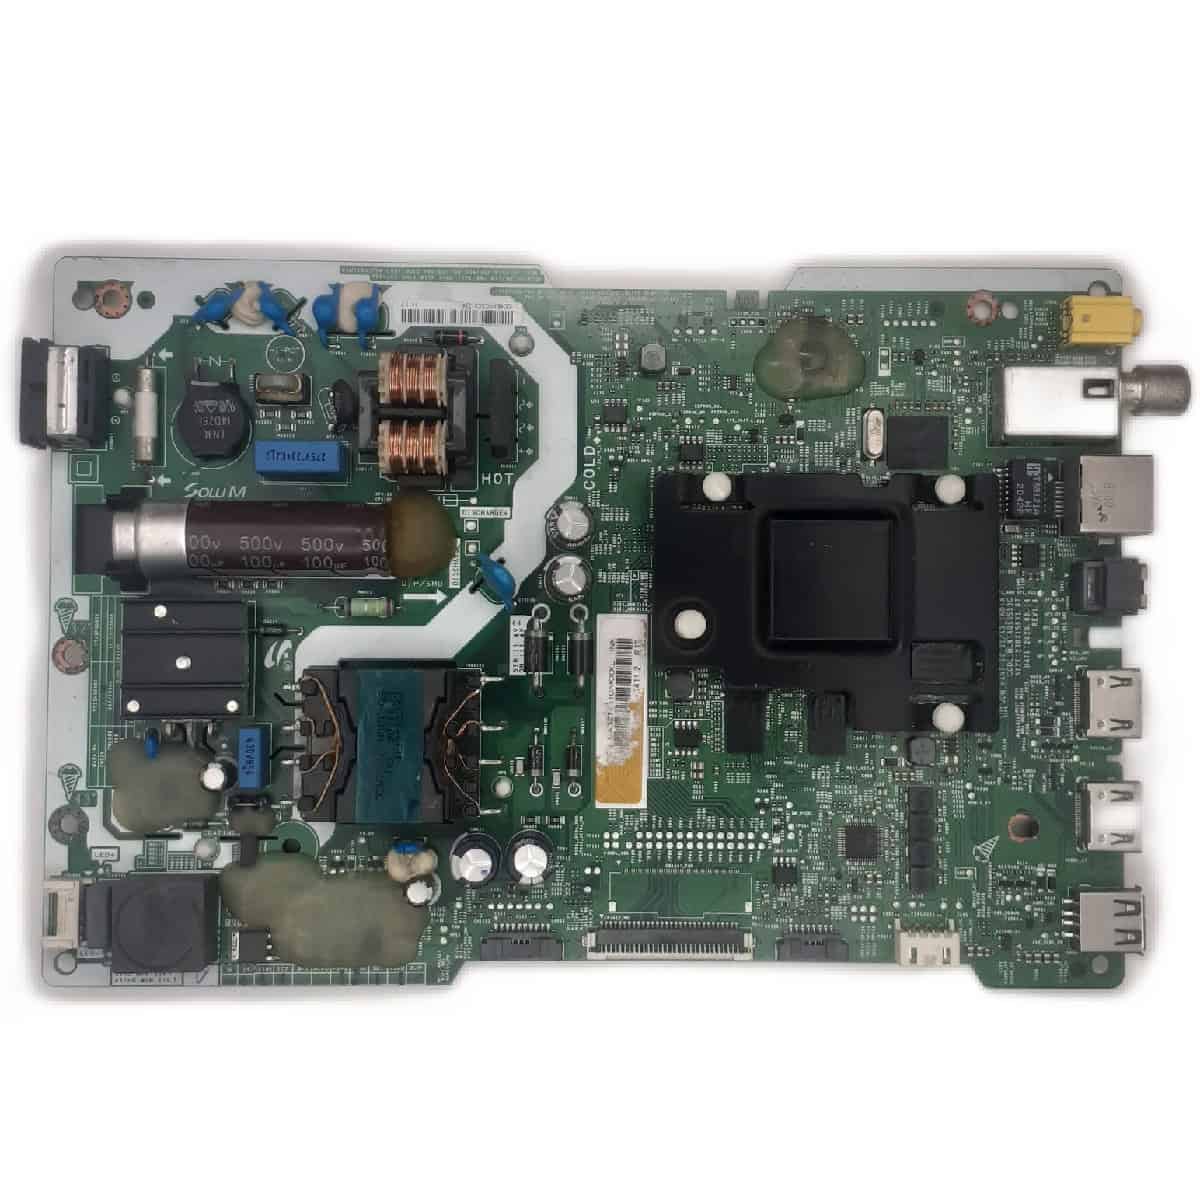 UA32T4340A KXXL SAMSUNG MOTHERBOARD FOR LED TV